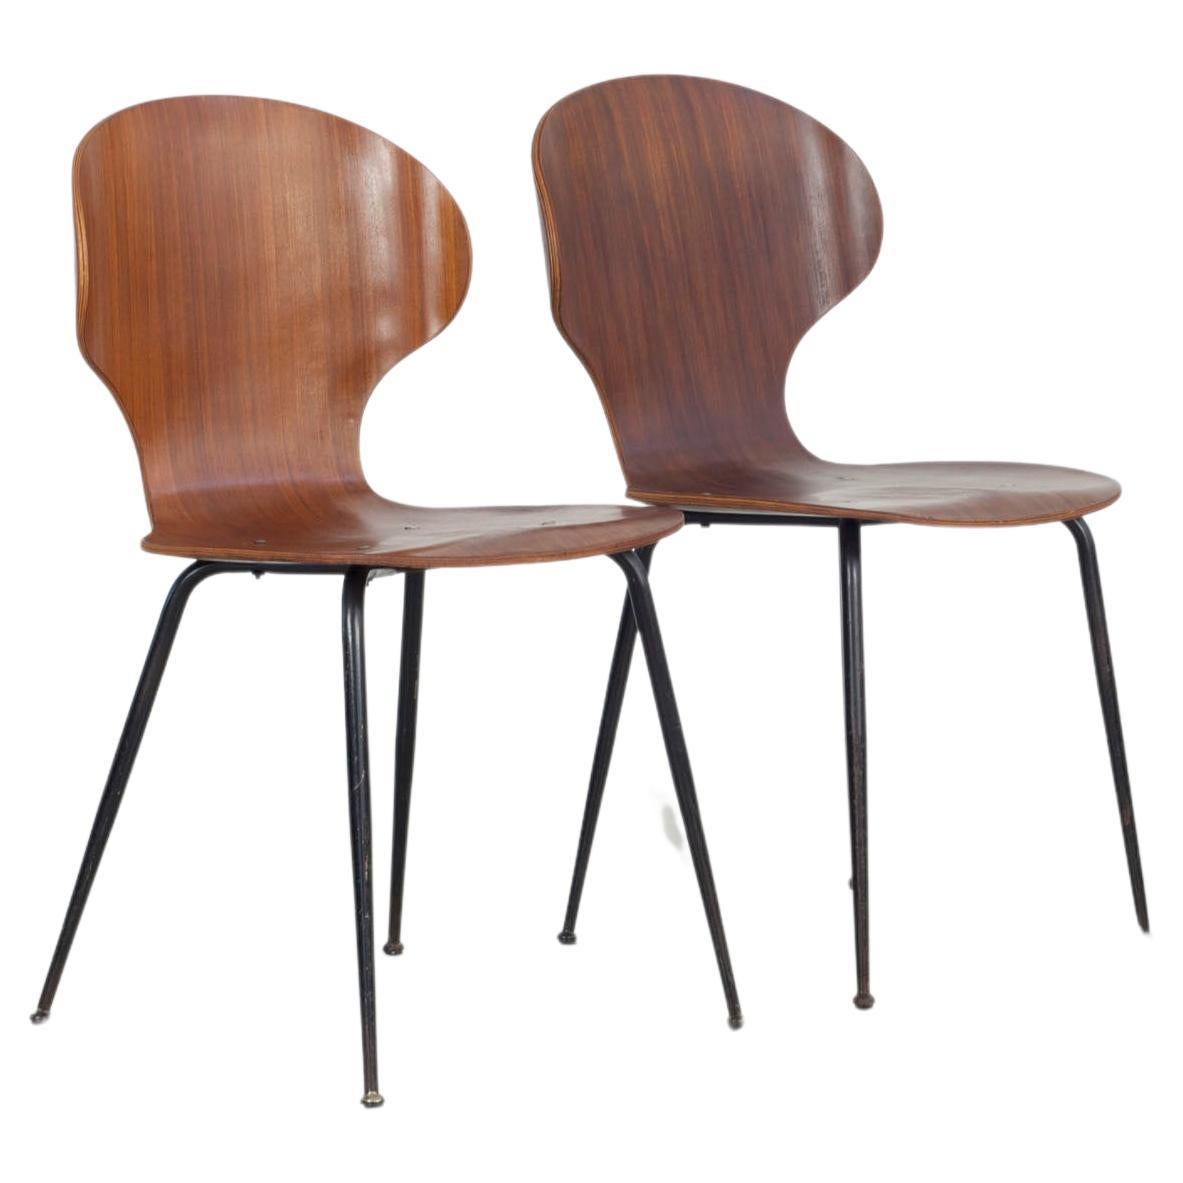 Set of  2 , Carlo Ratti Bentwood Chairs, Italy, 1950s. Industria Legni Curvati.  For Sale